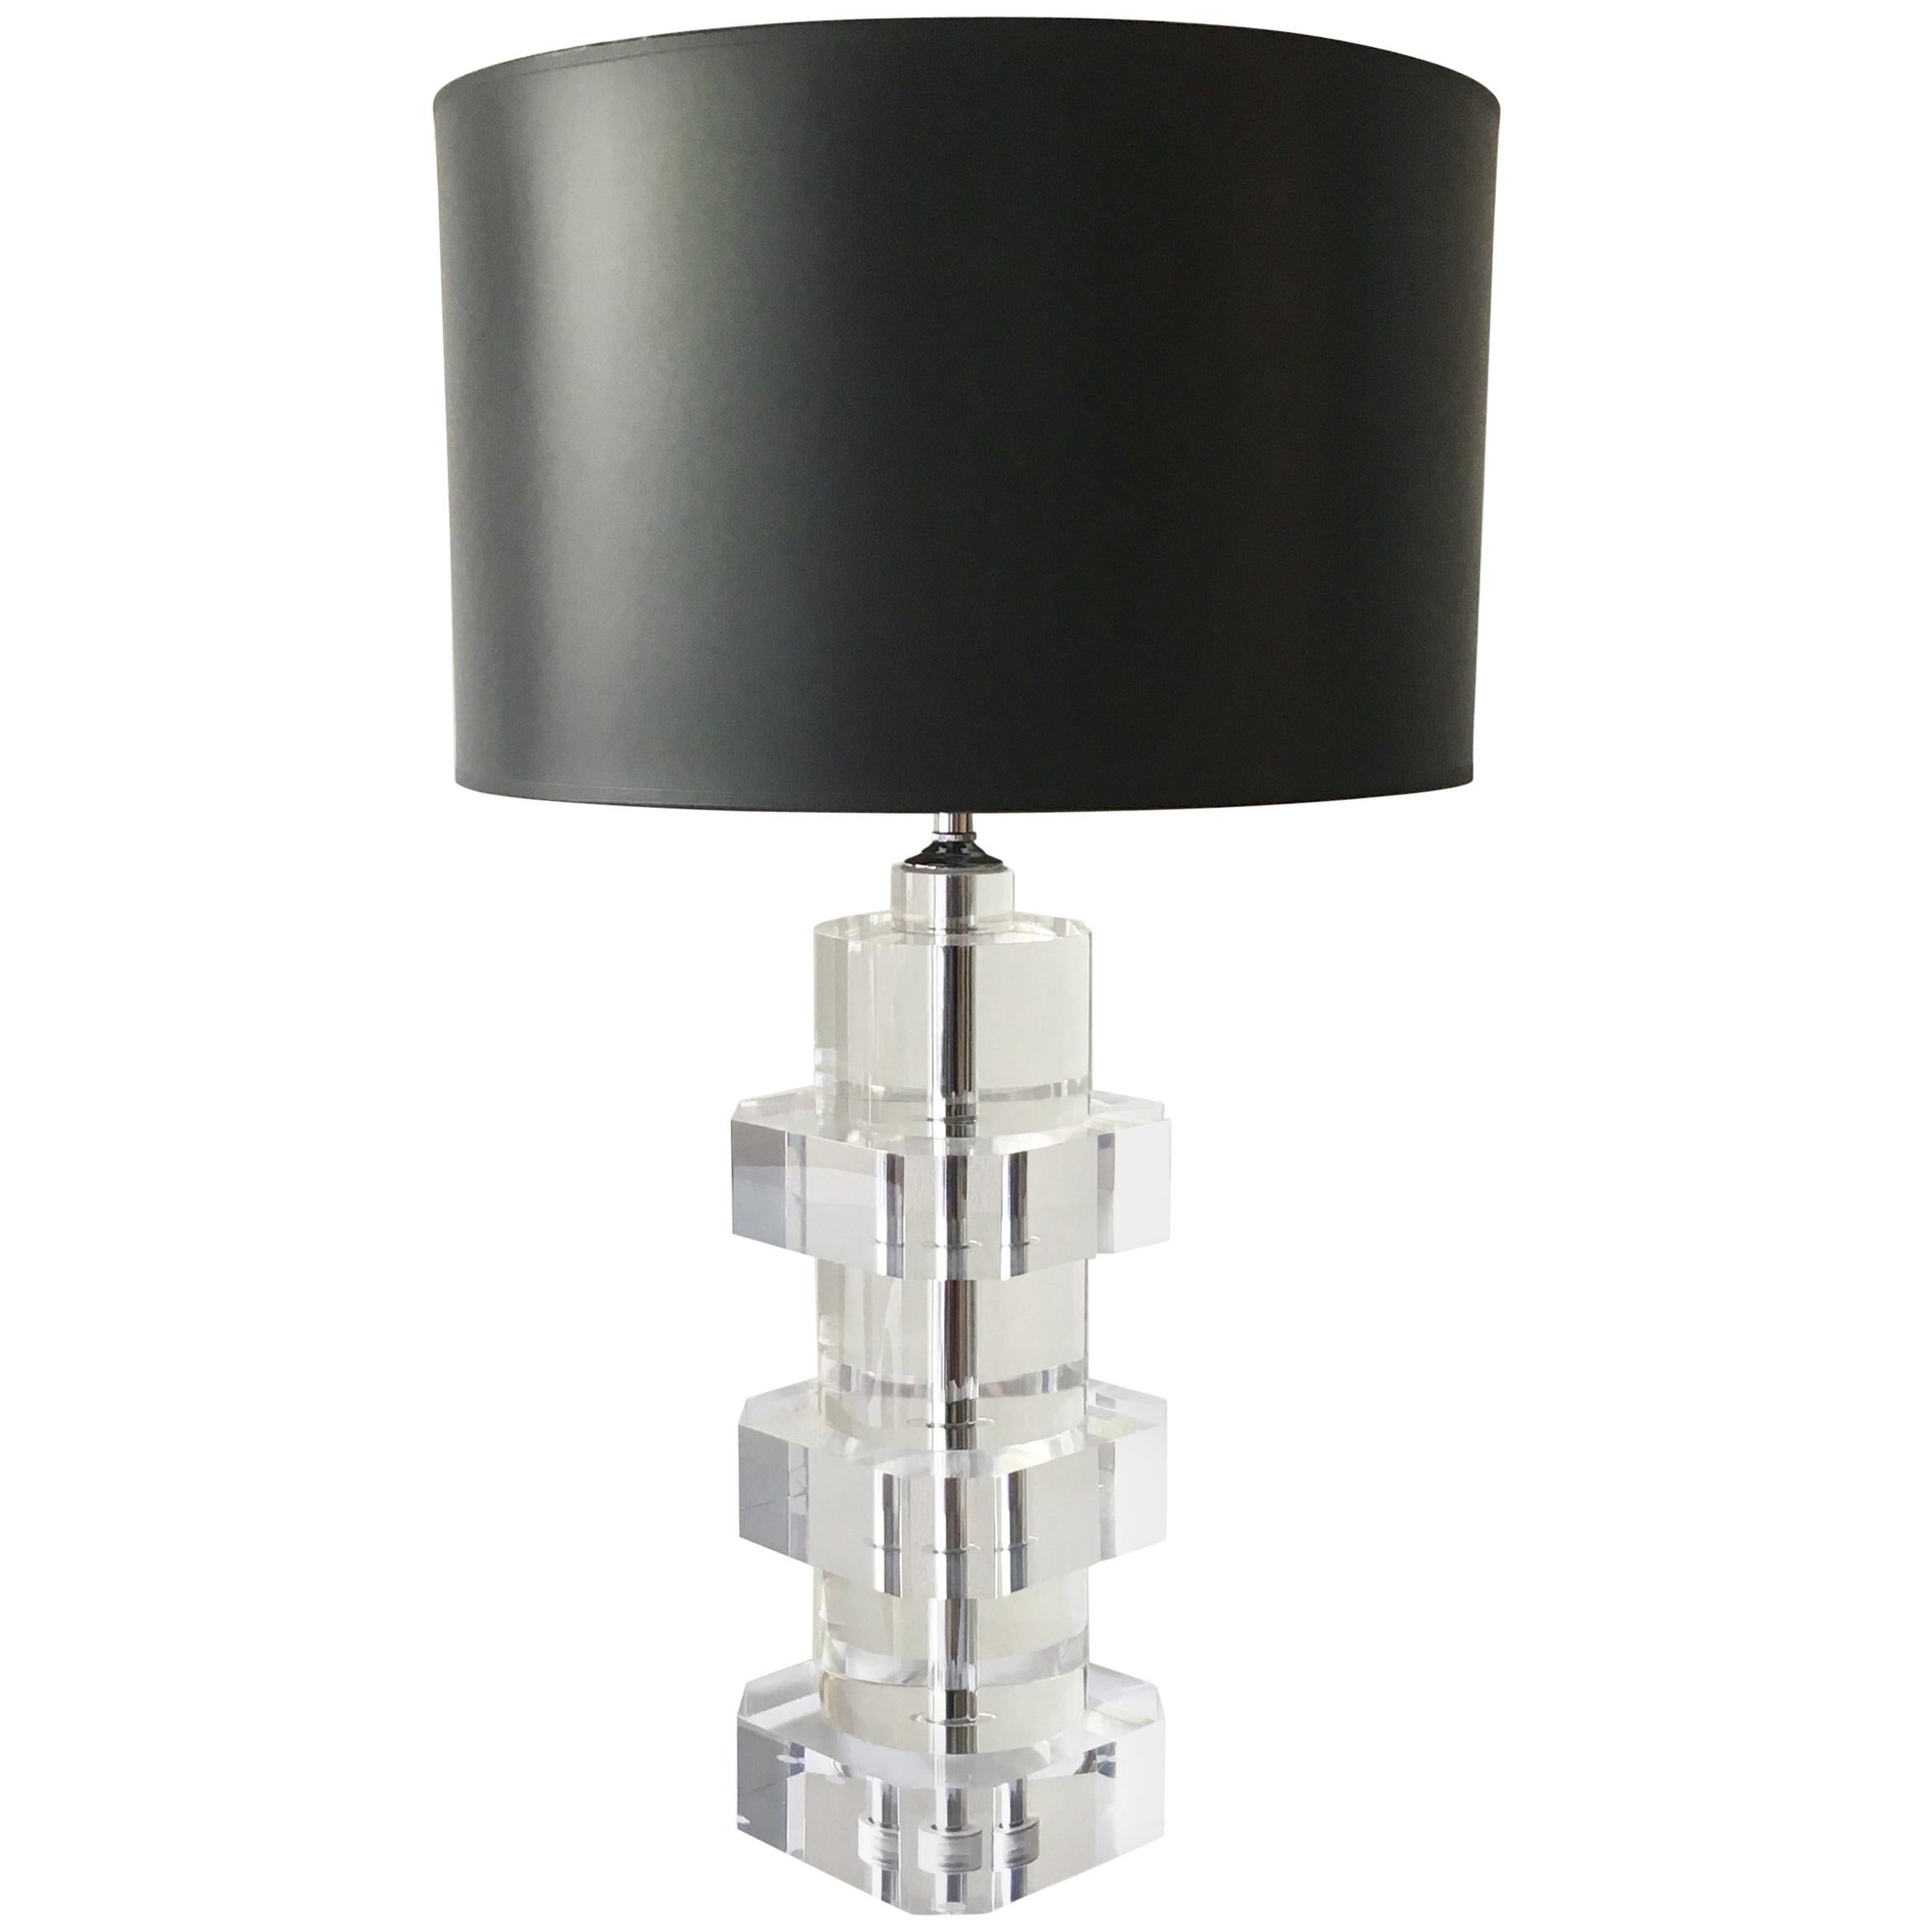 Heavy Lucite Table Lamp with Nickel Stem Detail, 1970s For Sale